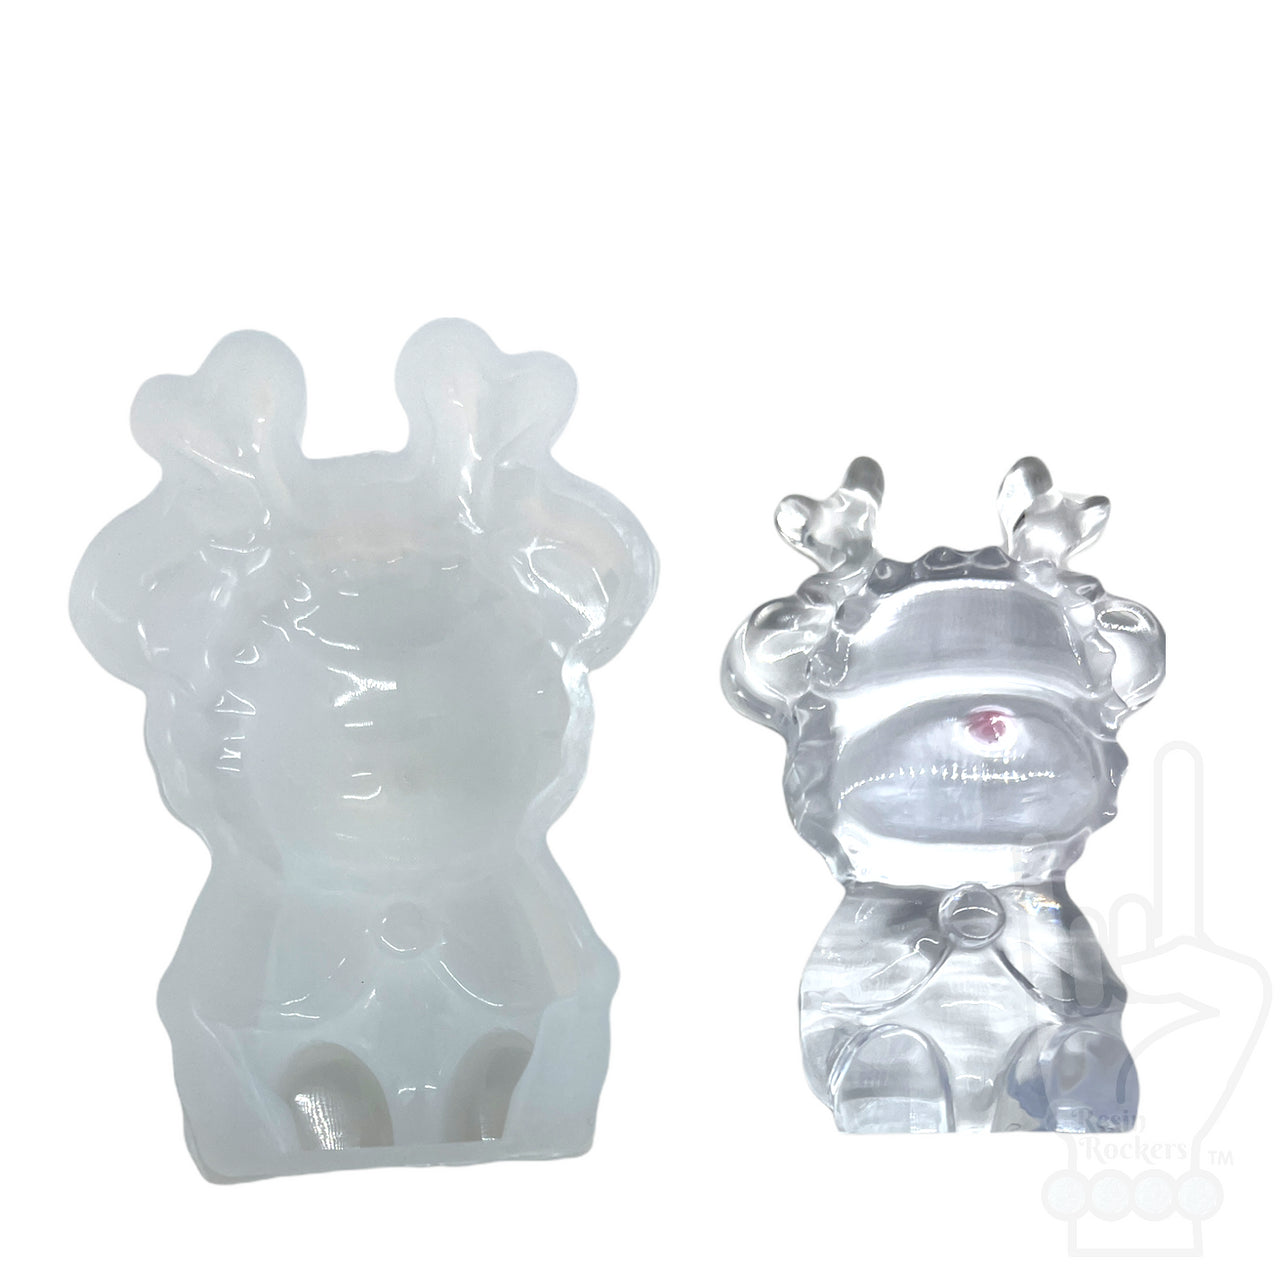 Giant Gummy Bear Silicone Mold 39 Count for UV or Epoxy Resin Art - Resin  Rockers